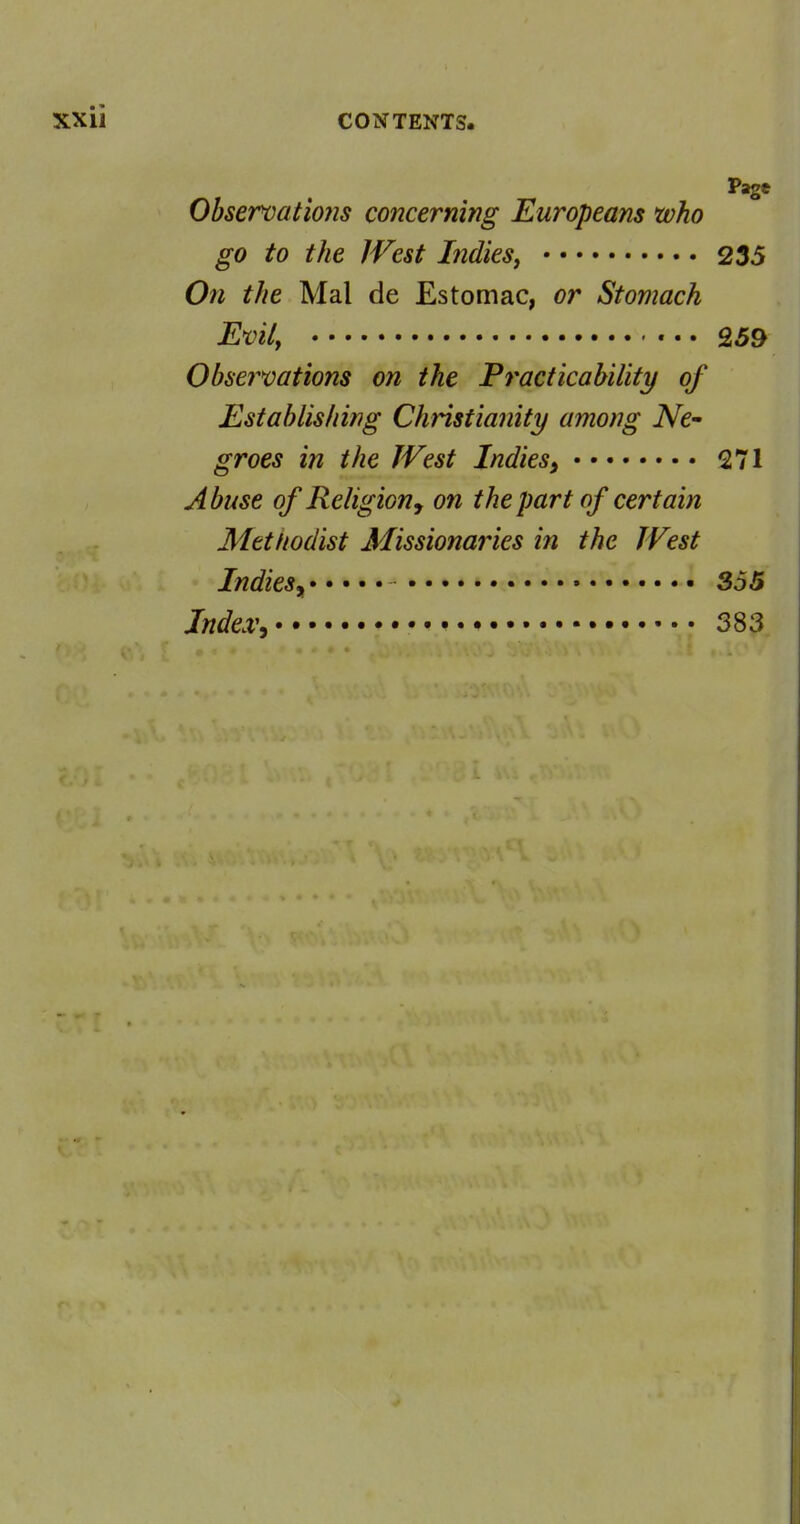 Page Obsercatmis concerning Europeans who go to the J Vest Indies^ 235 On the Mai de Estomac, or Stomach Evily «.. 259 Observations on the Practicability of Establishing Christianity among iVe- groes in the TVest Indies^ 271 Abuse of Religion J on the part of certain Mttftodist Missionaries in the West Indies^ • S55 Index^ • 383